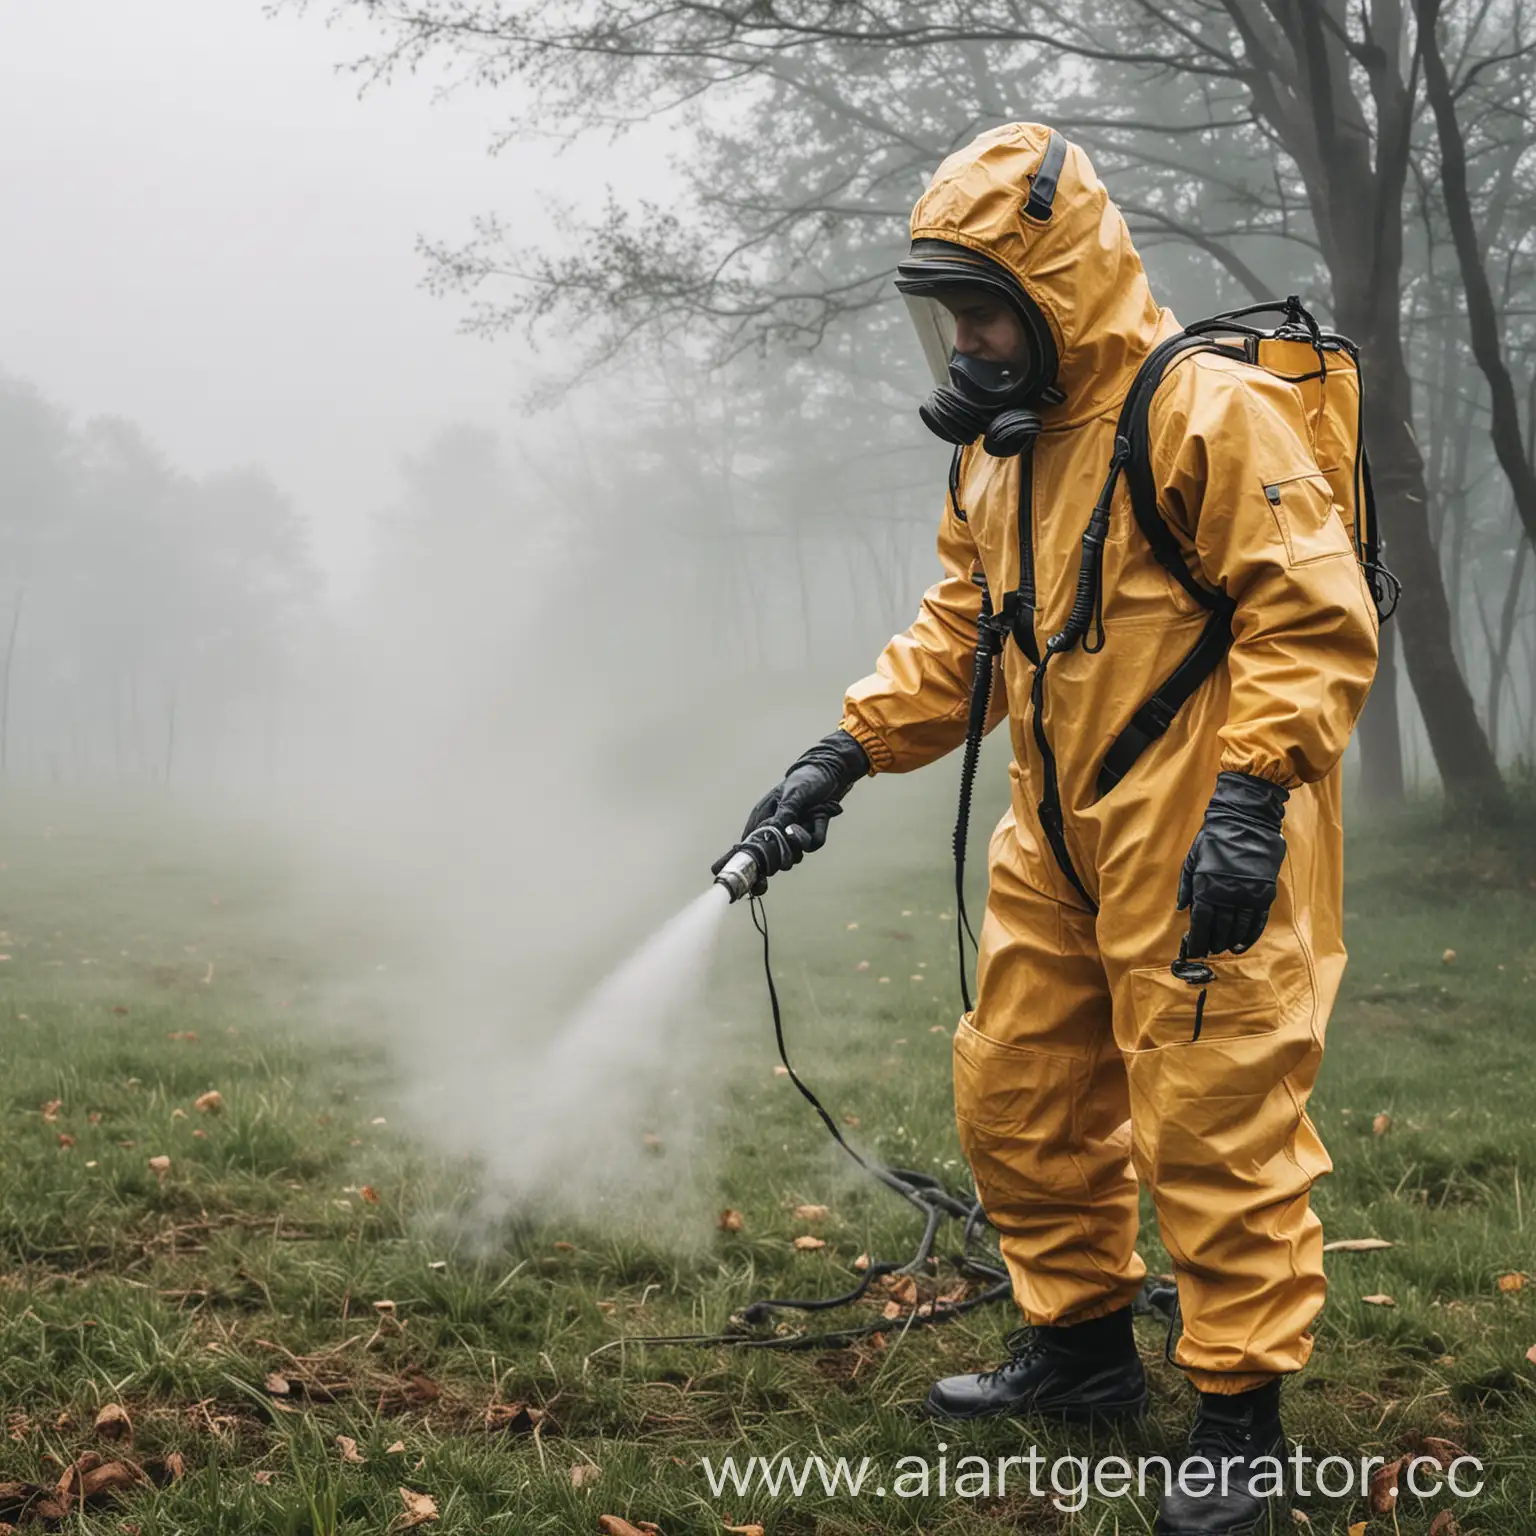 Professional-Pest-Control-Person-in-Protective-Suit-Spraying-Cold-Fog-to-Combat-Bugs